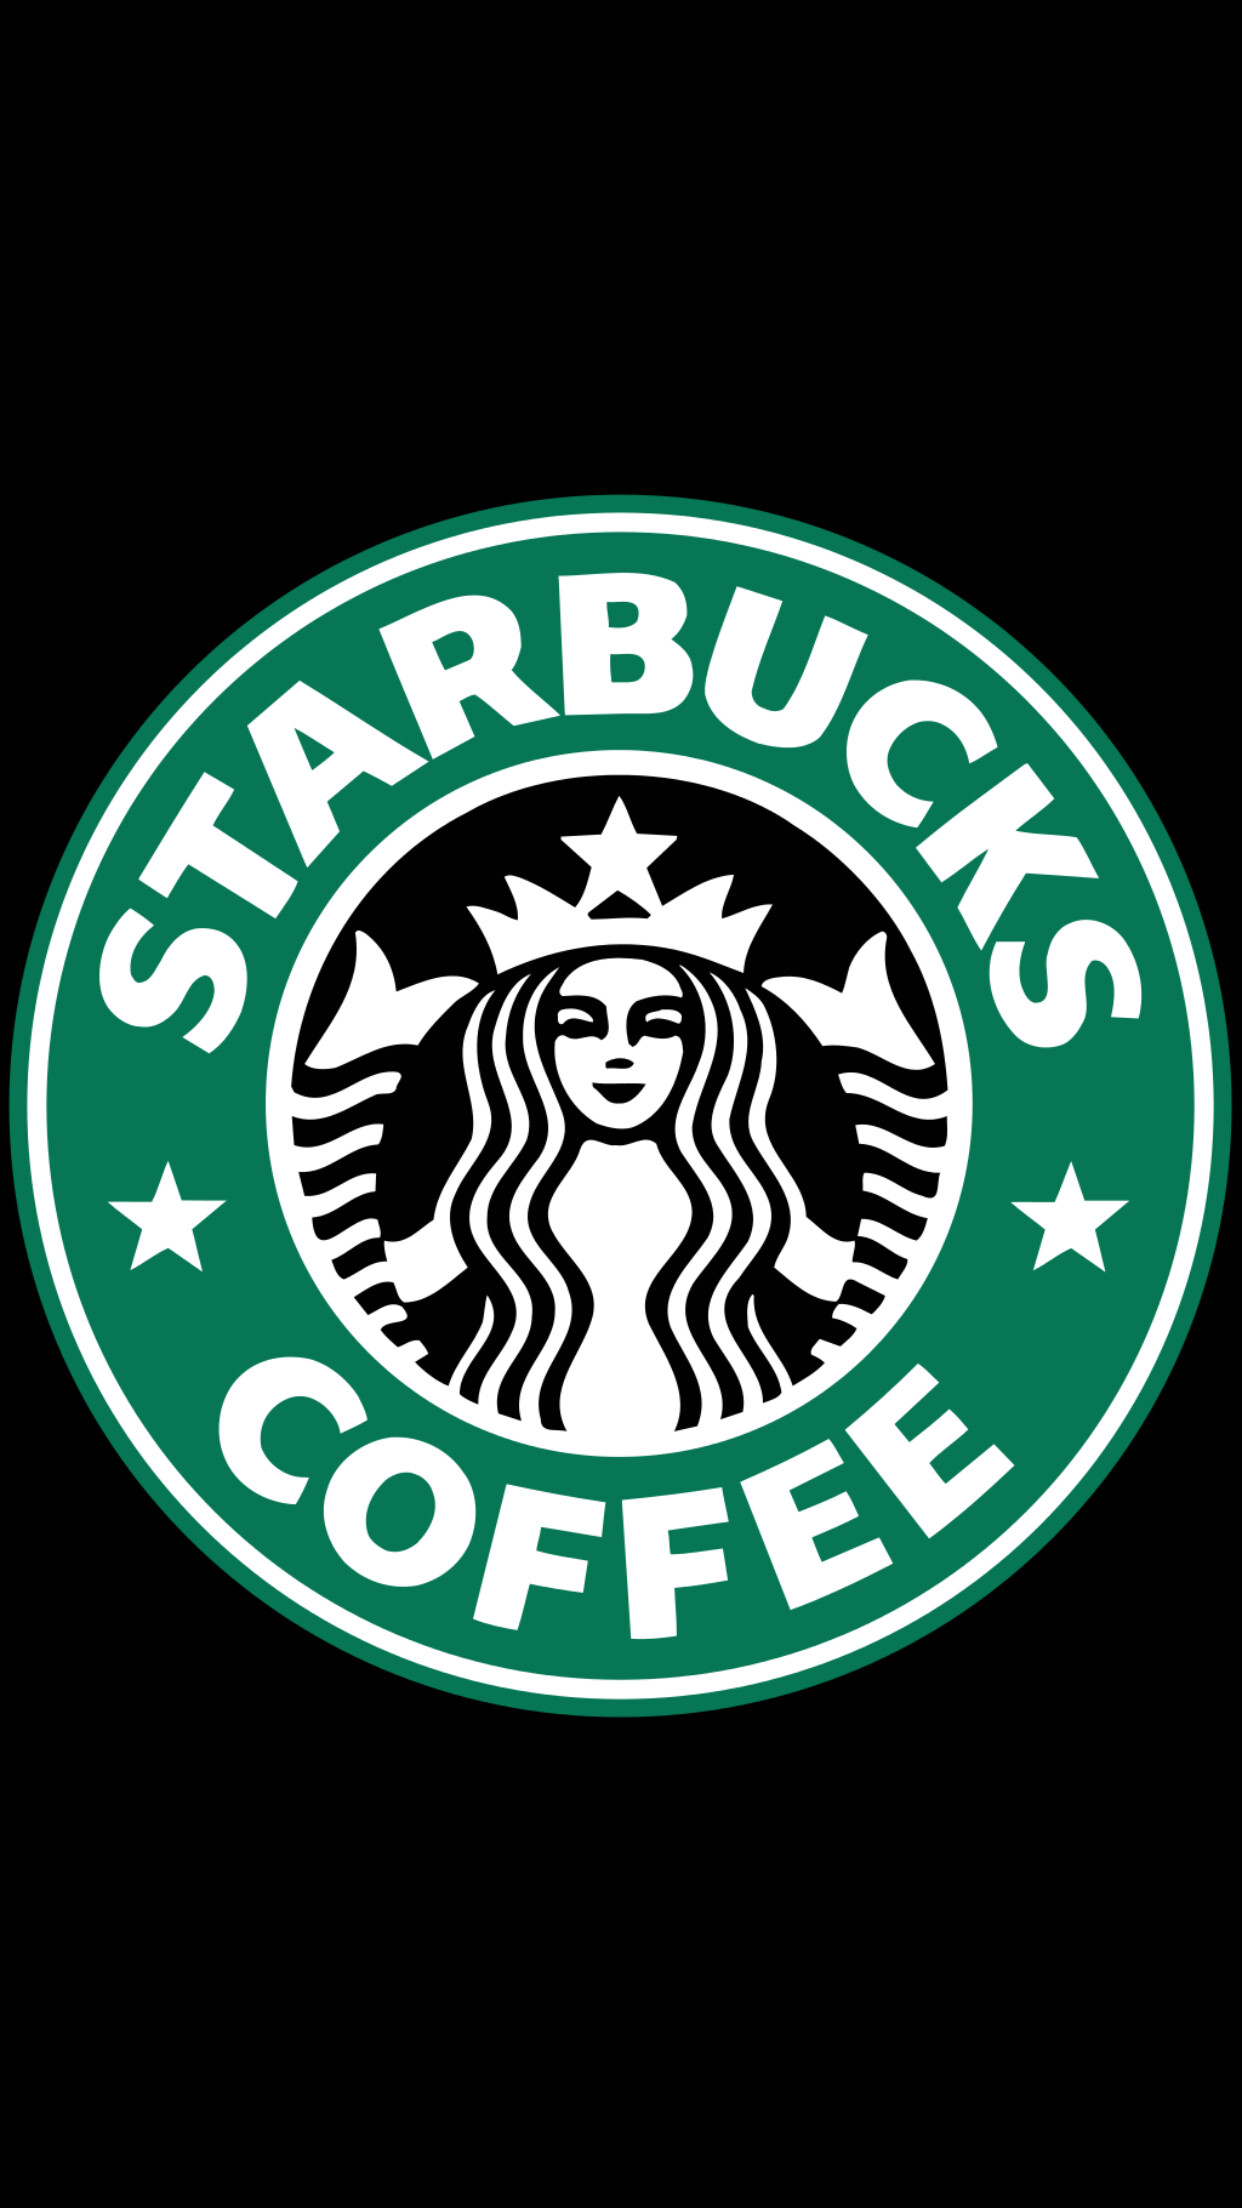 Starbucks: Logo, The company, through its stores, offers several blends of coffee, handcrafted beverages, merchandise, and food items. 1250x2210 HD Wallpaper.